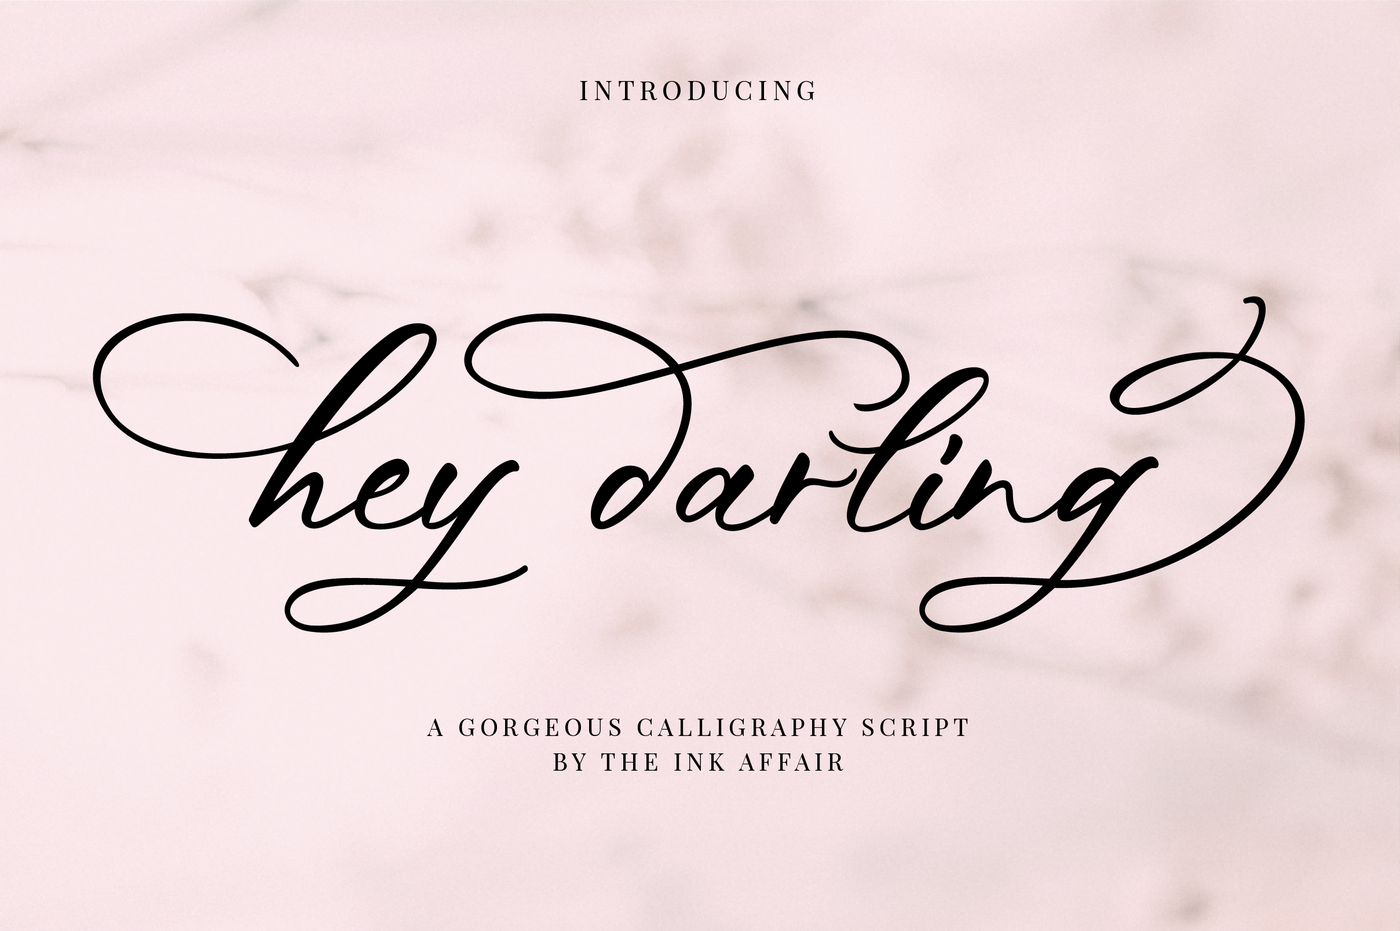 Hey Darling Calligraphy Script Font By The Ink Affair Thehungryjpeg Com